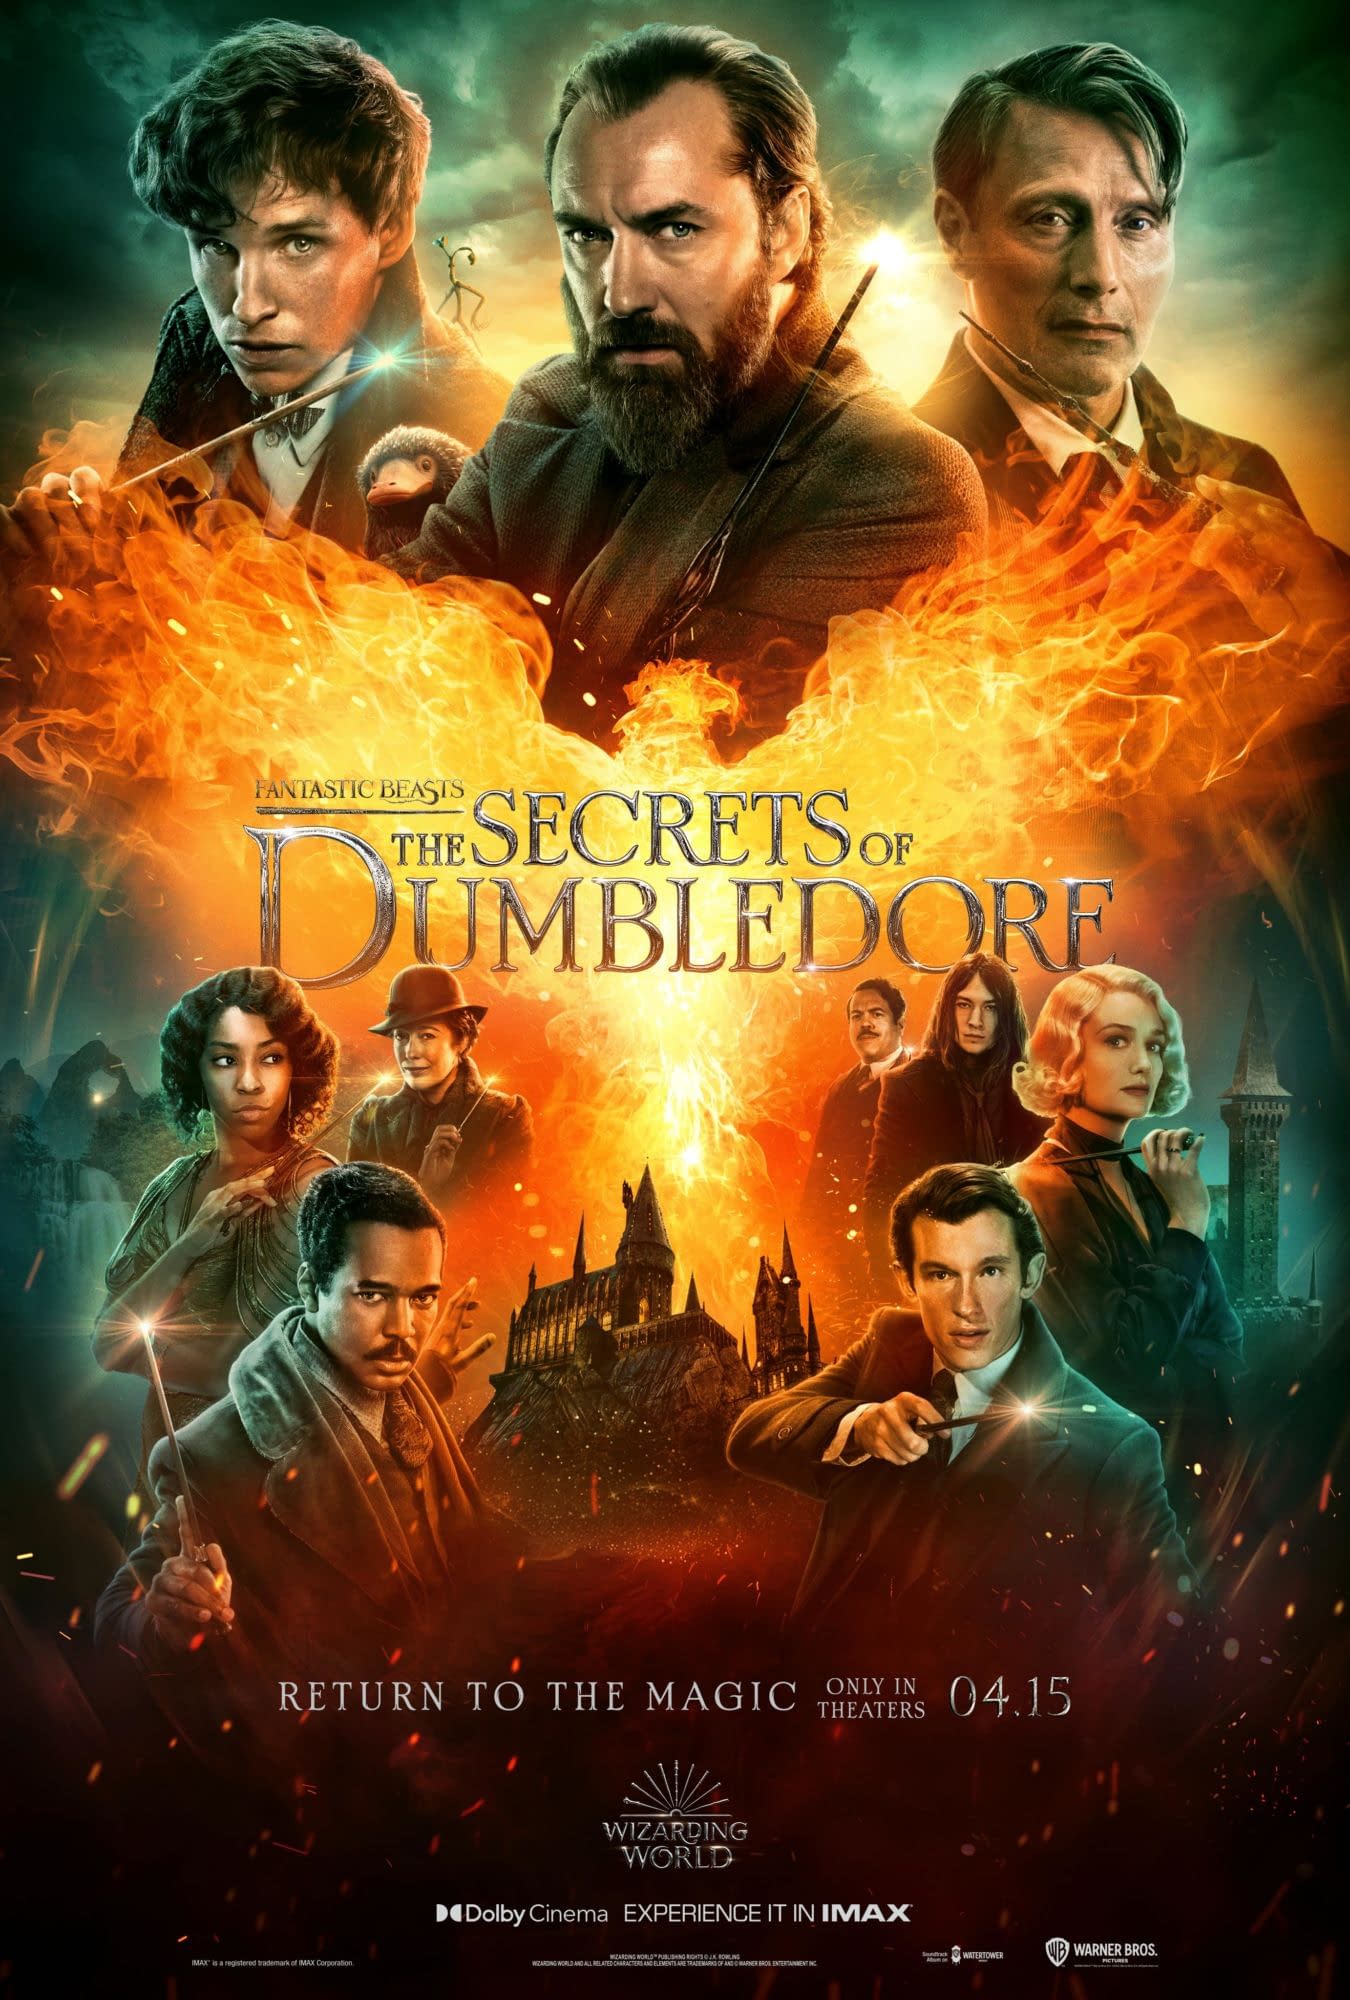 Fantastic Beasts: The Secrets of Dumbledore Poster and Trailer